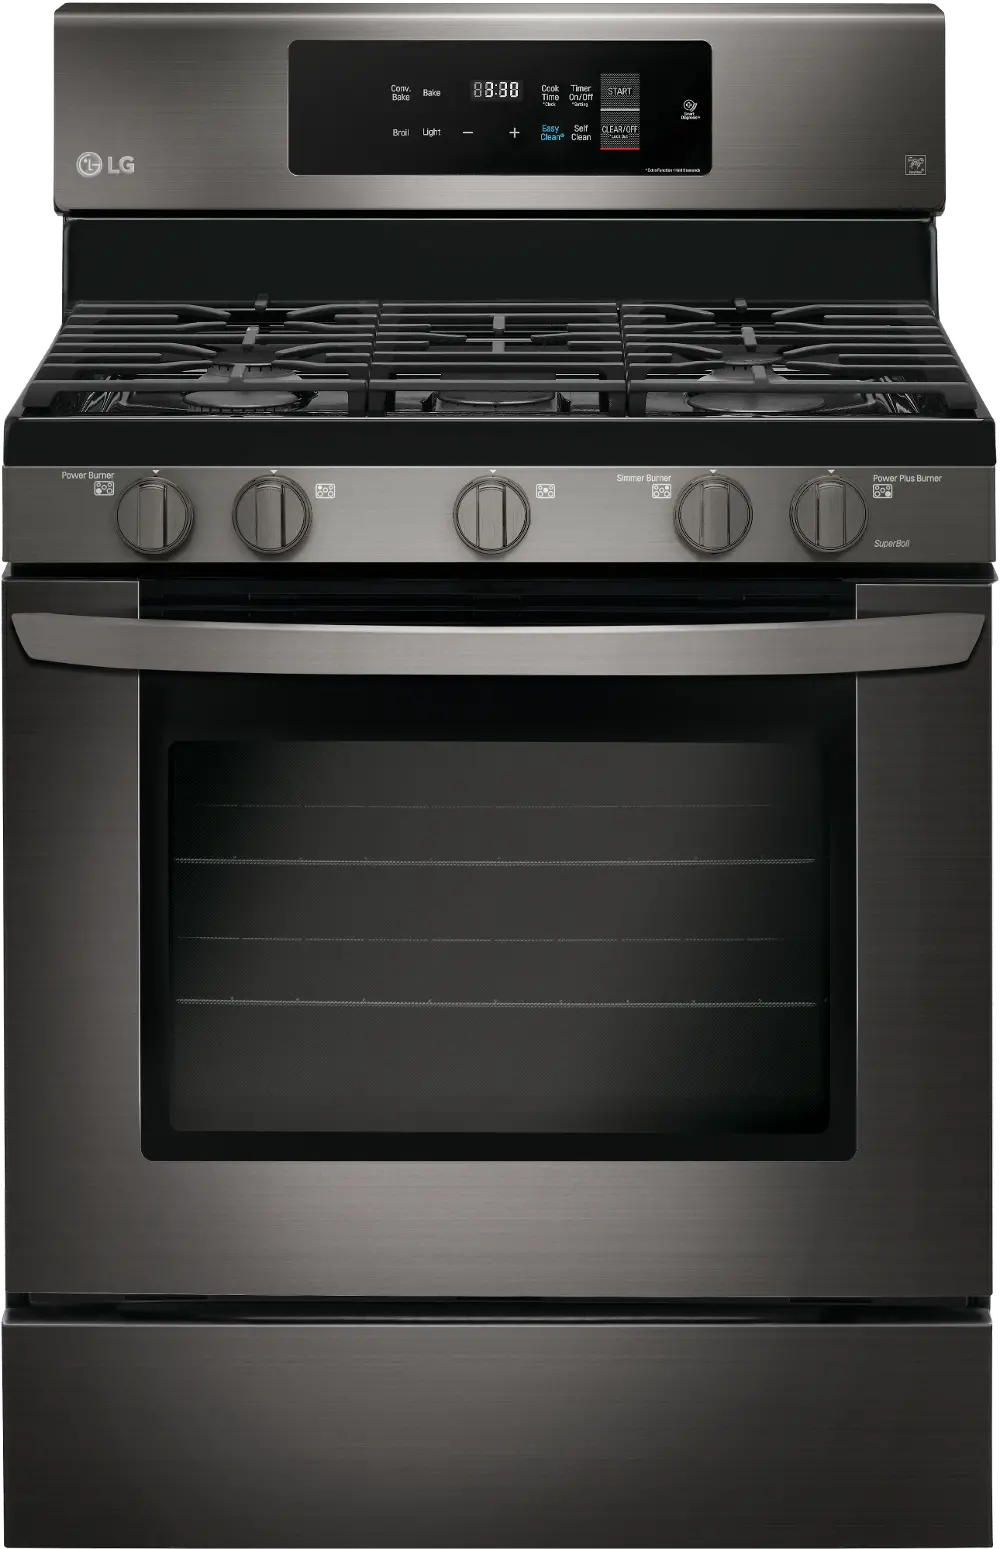 LRG3194BD LG 30 Inch Gas Range with Convection Oven - 5.4 cu. ft. Black Stainless Steel-1